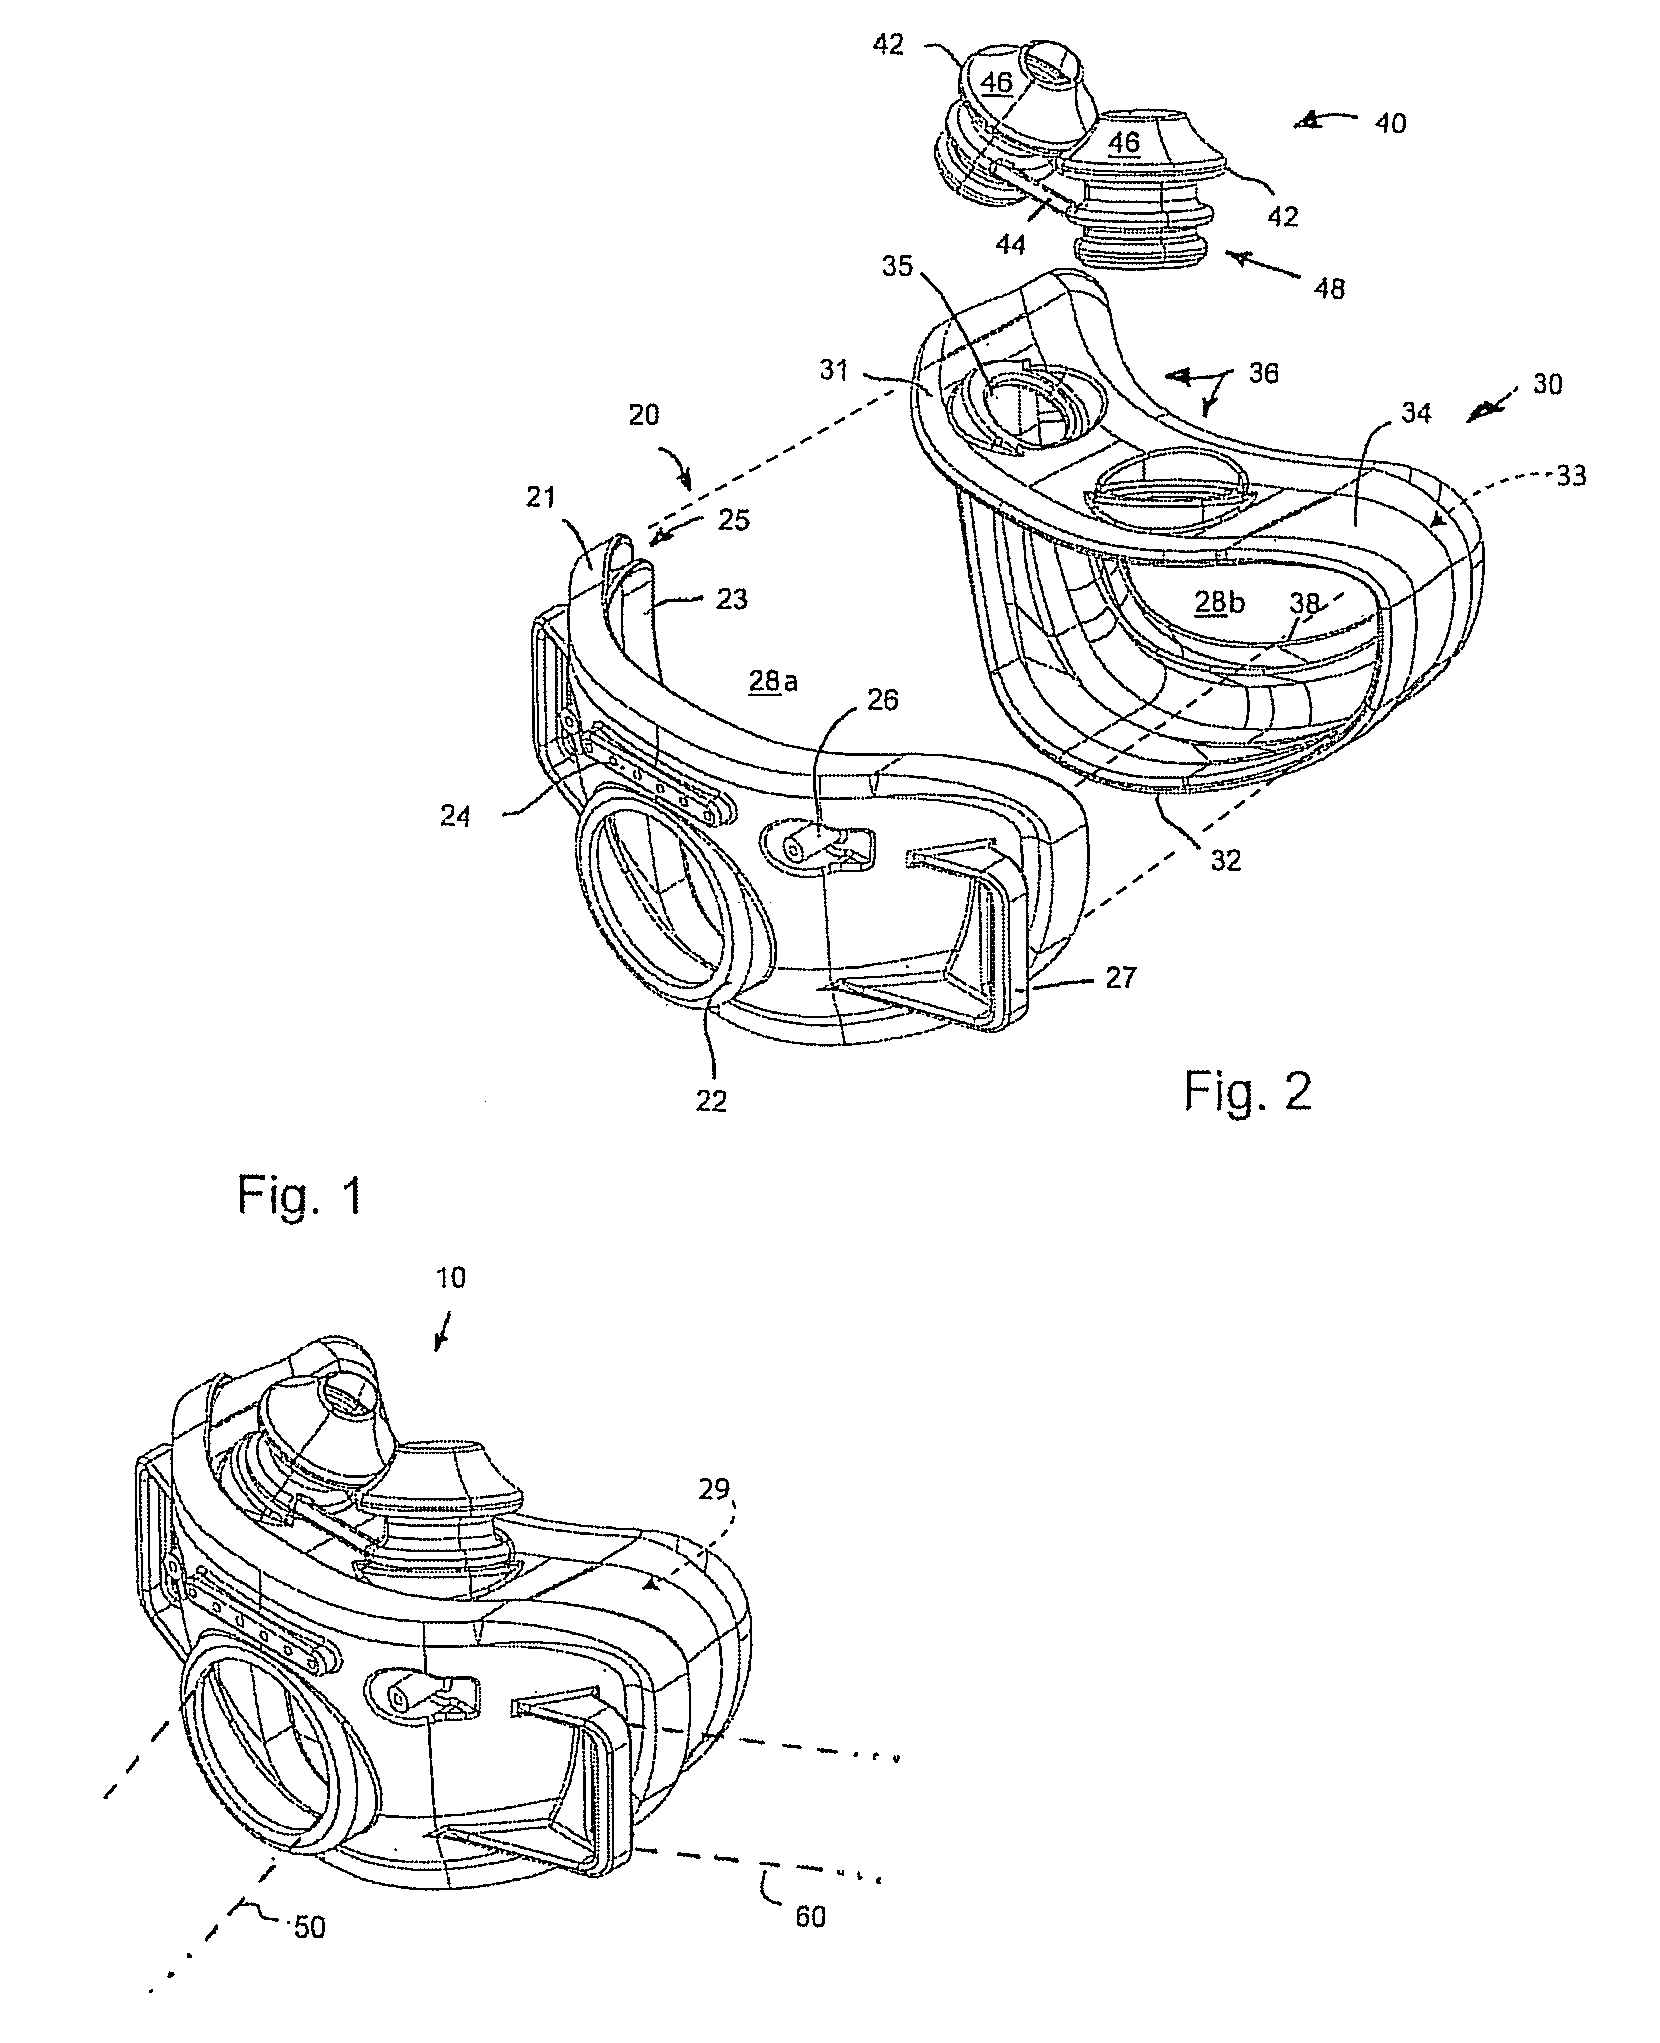 Hybrid ventilation mask with nasal interface and method for configuring such a mask